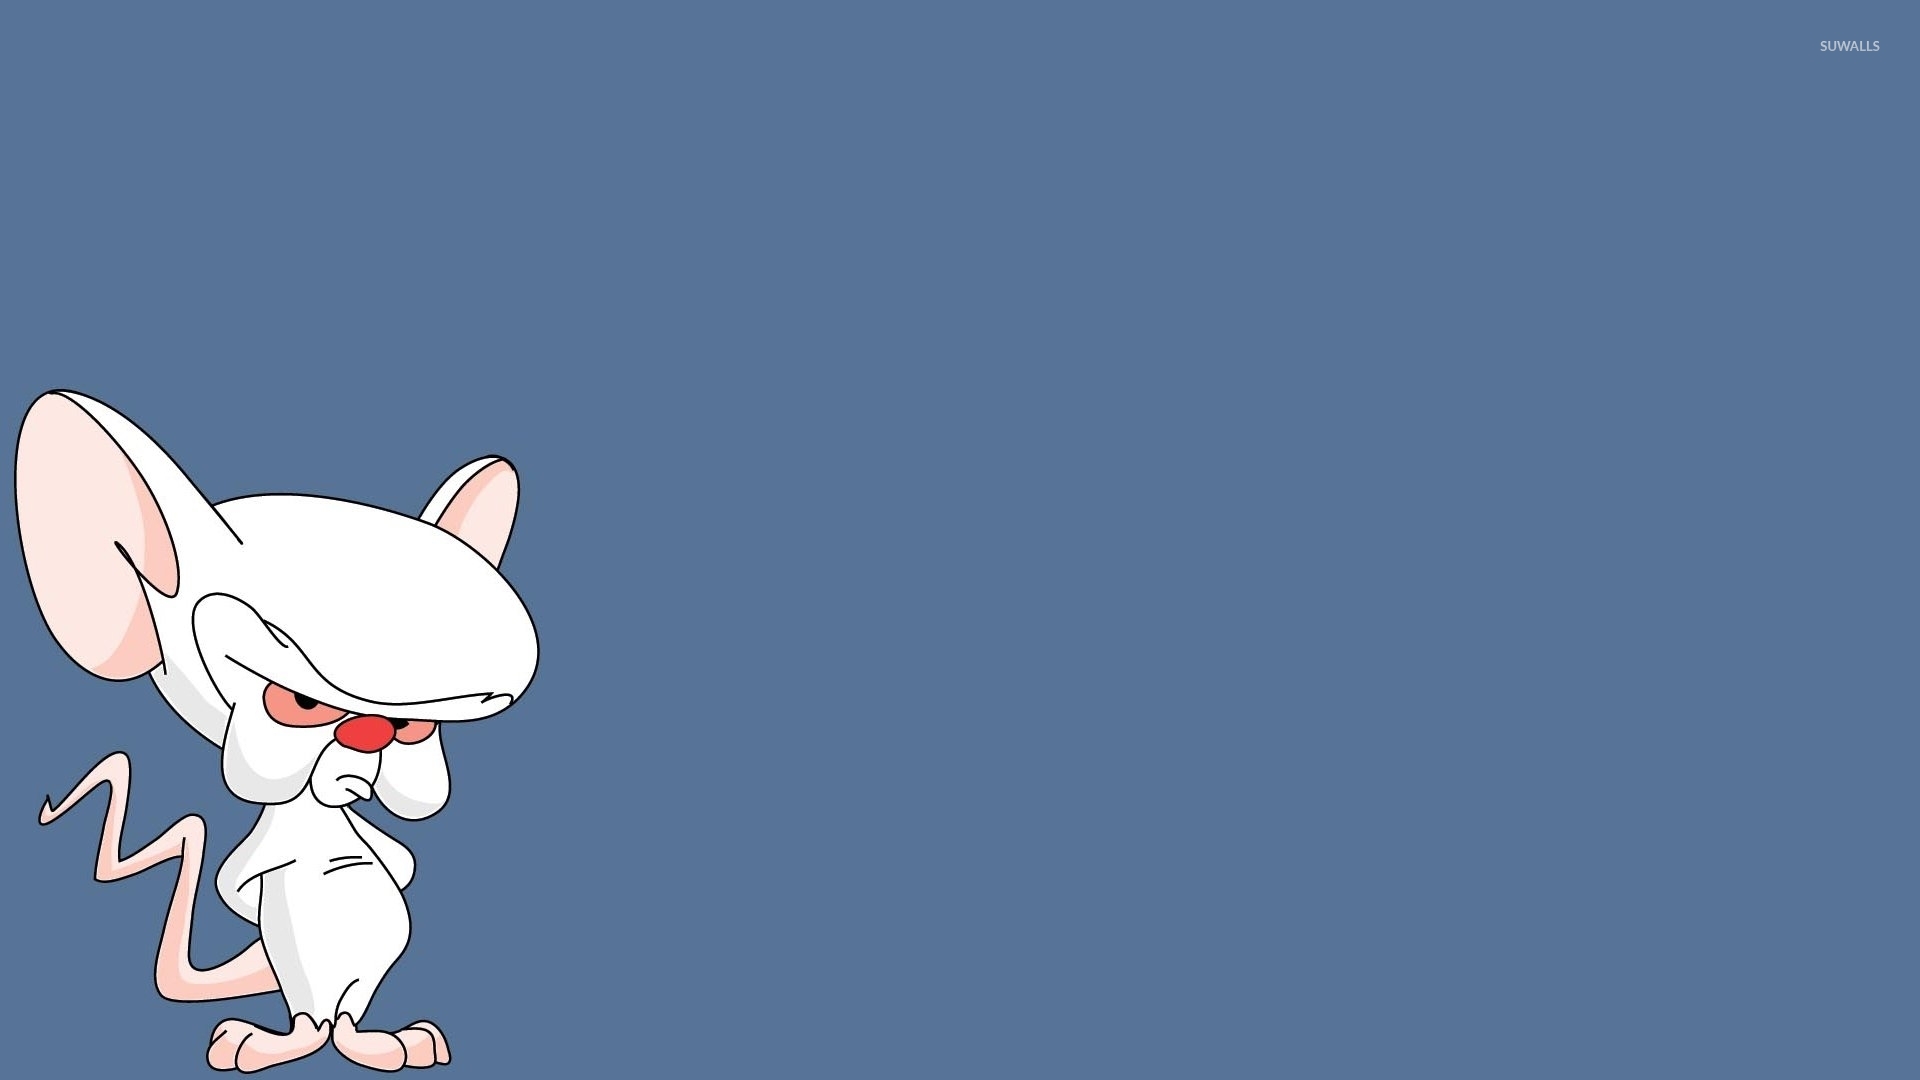 Brain from Pinky and the Brain wallpaper - Cartoon wallpapers - #51244